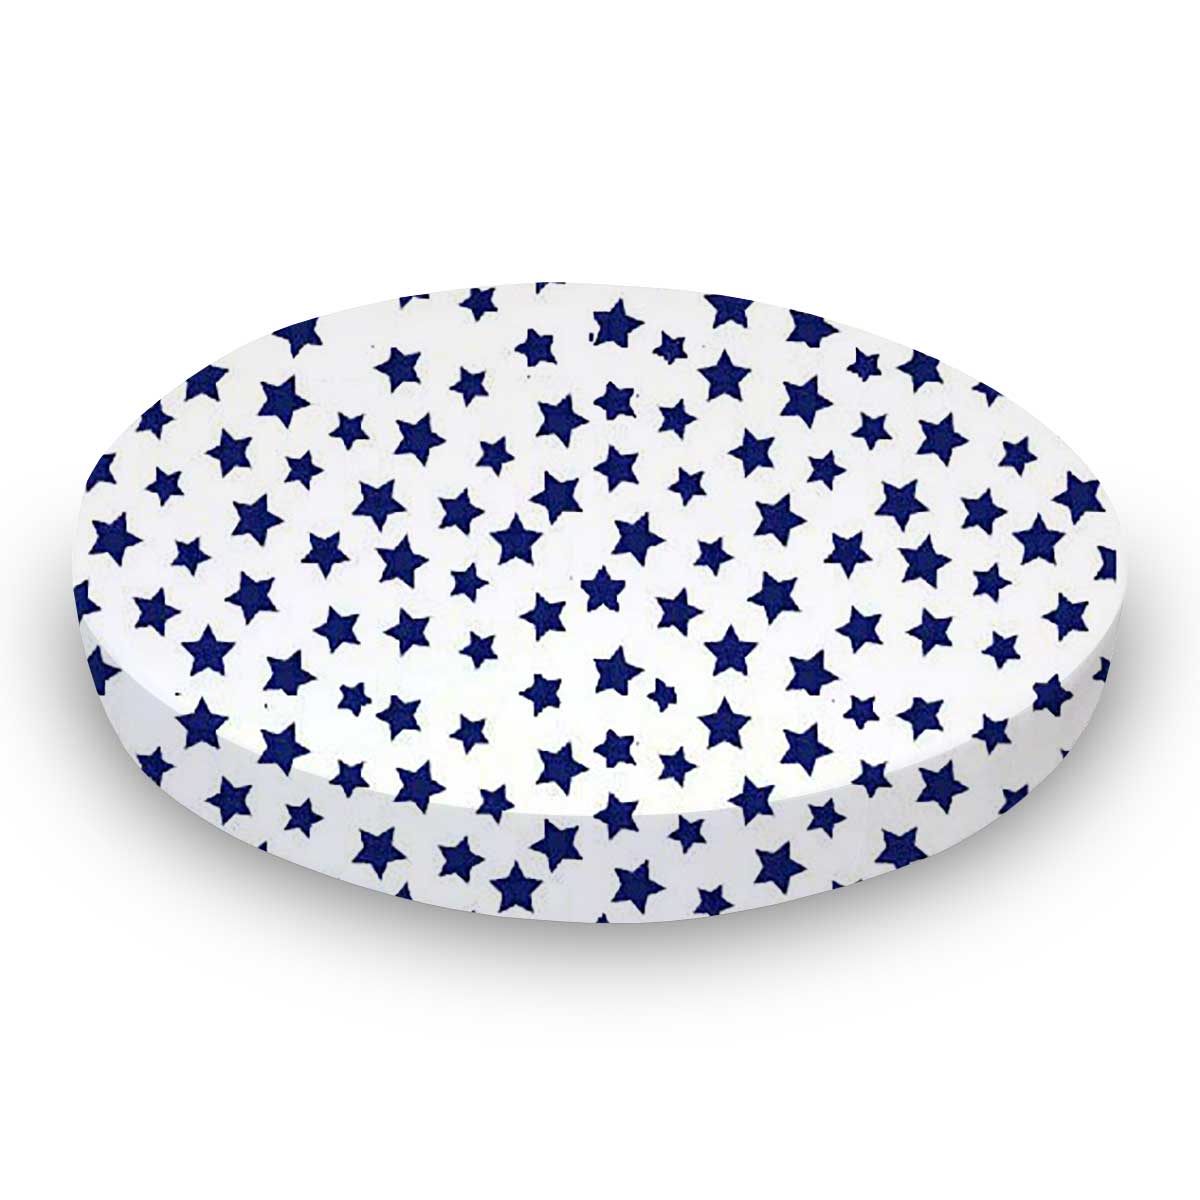 Oval Crib (Stokke Sleepi) - Primary Stars Navy On White Woven - Fitted  Oval